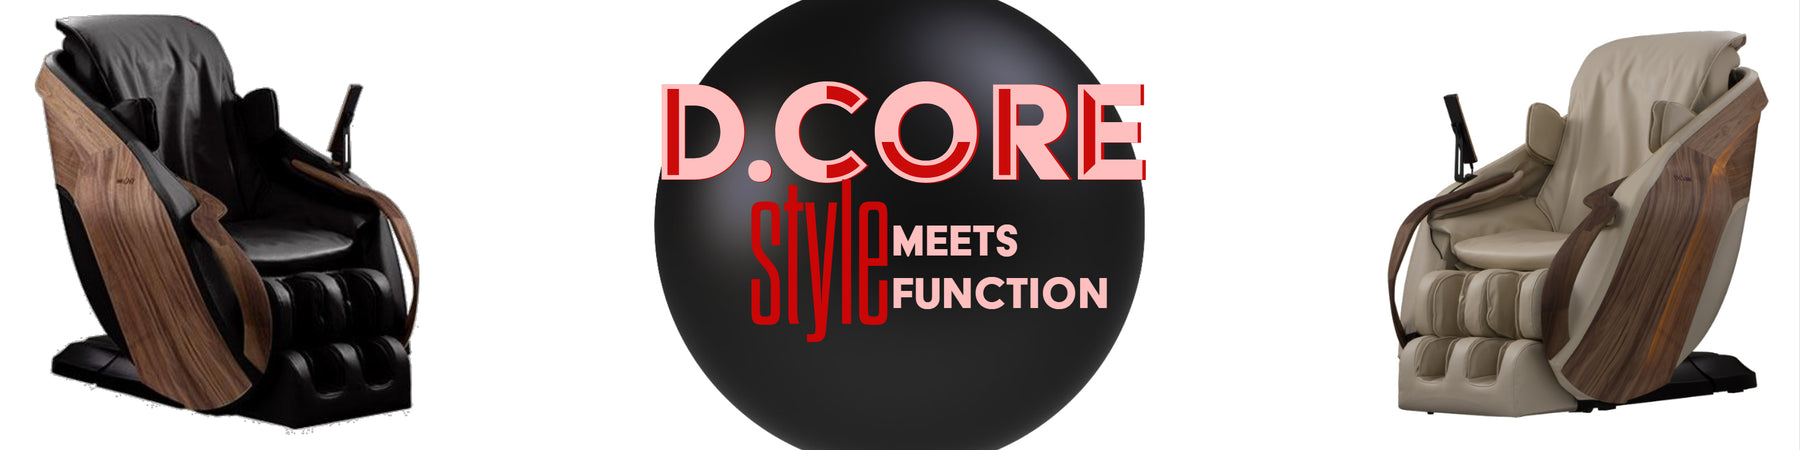 Introducing the D.Core